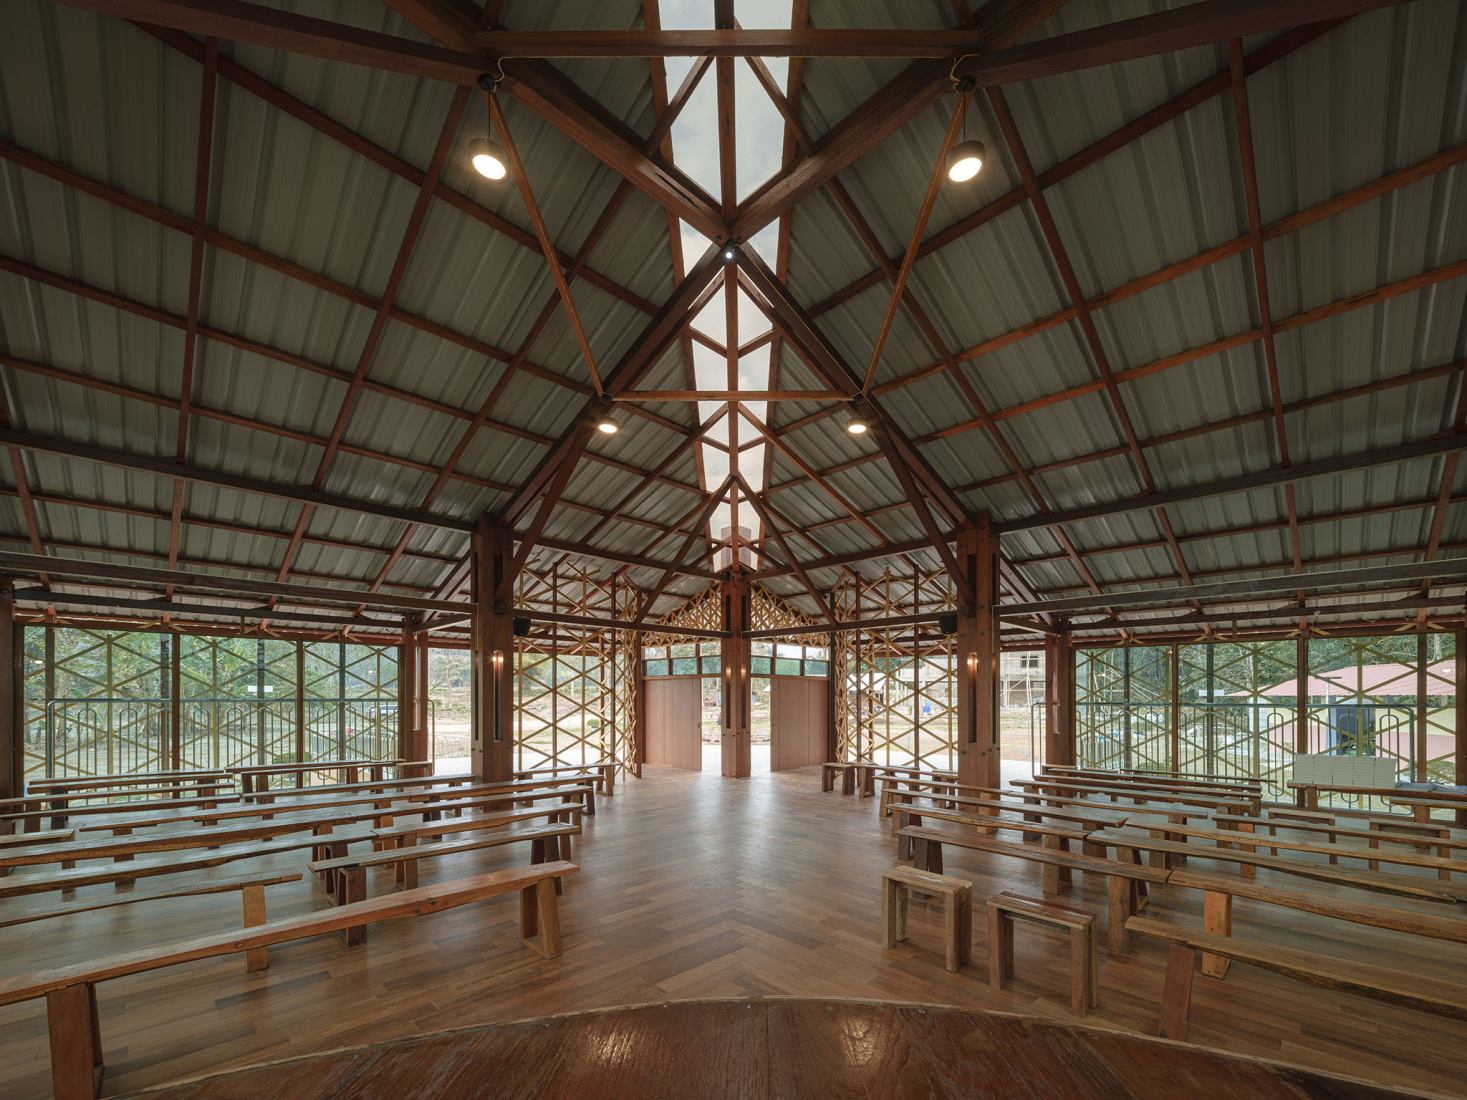 Oratory of St Francis Xavier by Paco García Moro. Photograph by Panoramic Studio.